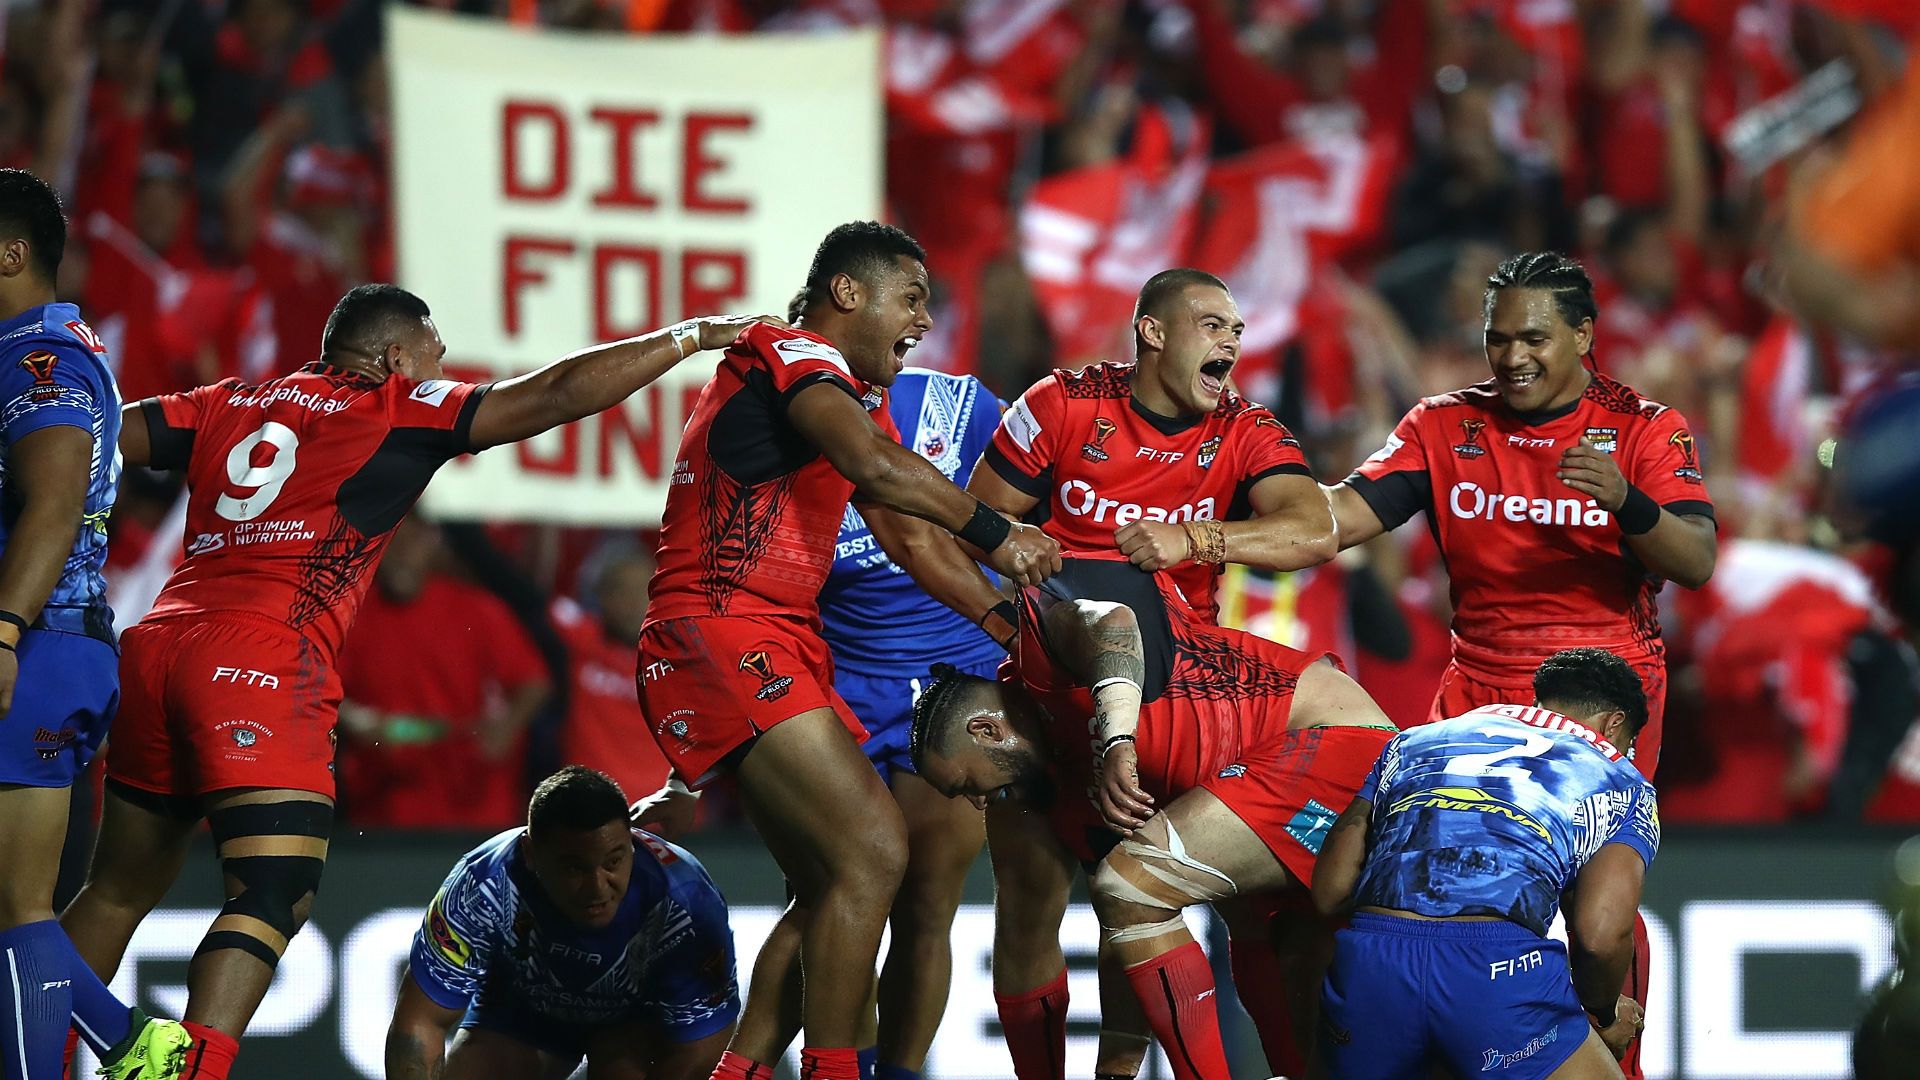 Rugby league fans call for regular series between Tonga and Samoa